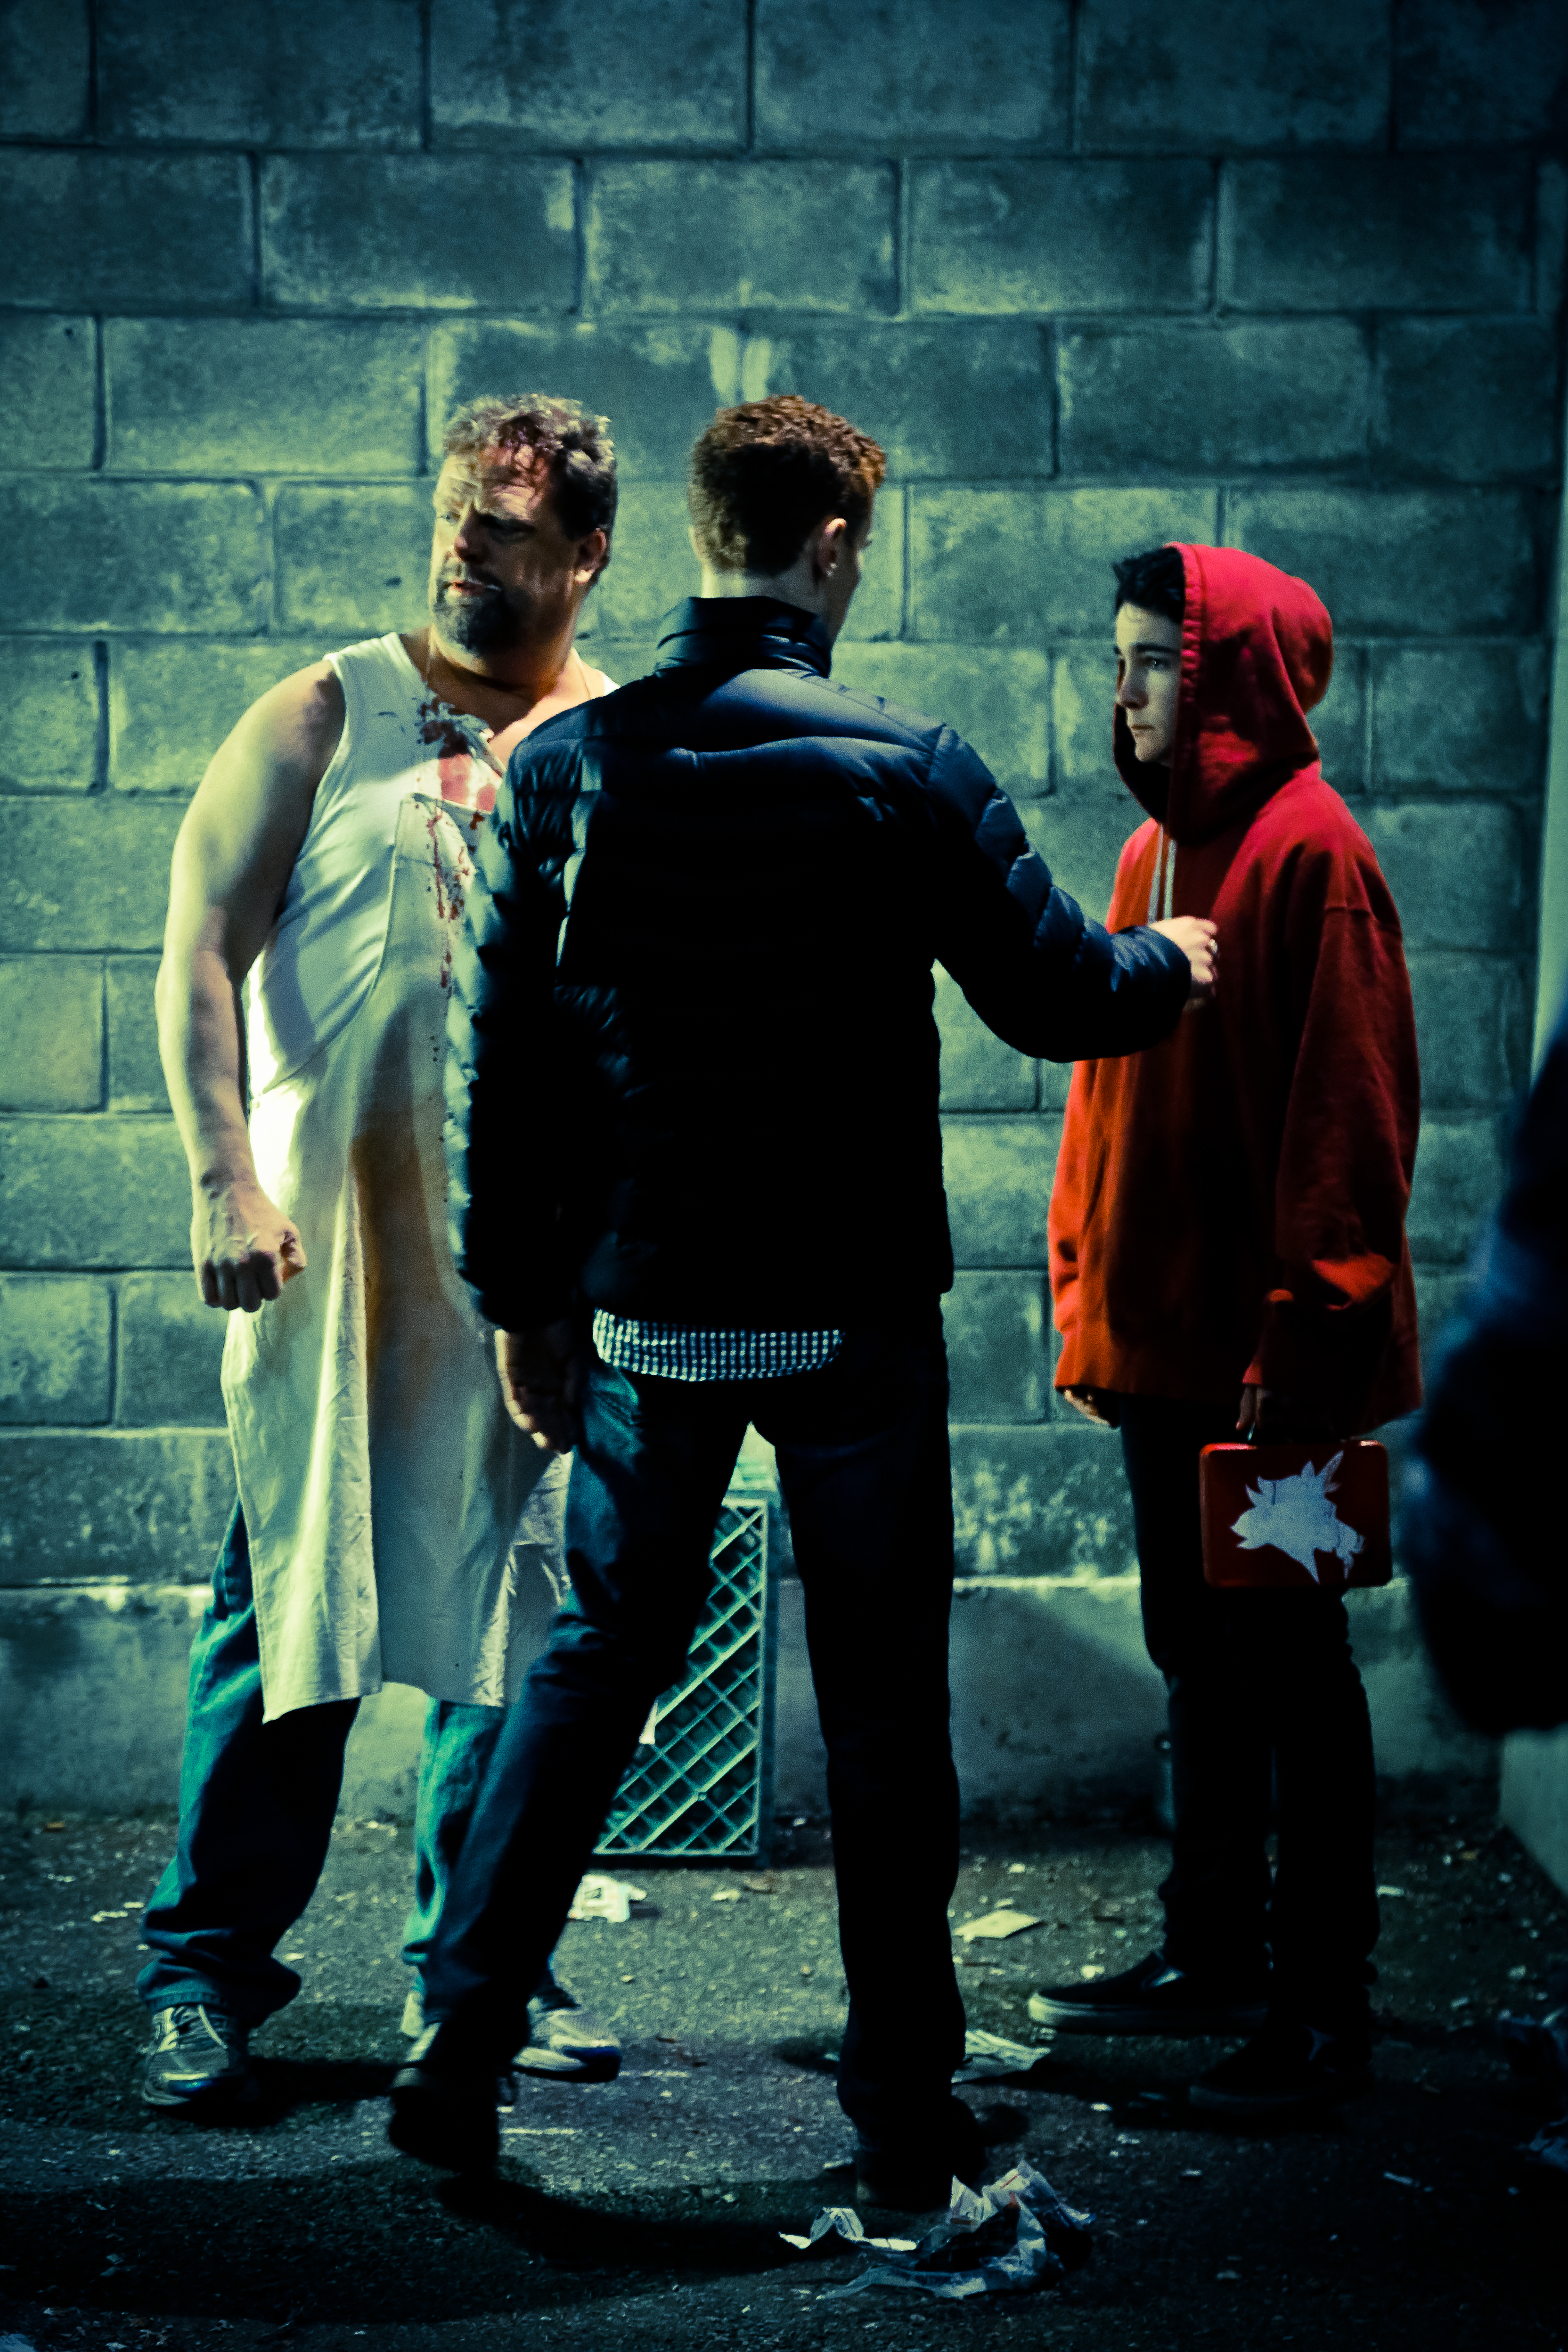 Nigel Edwards blocking a scene with Christian Bower and Jake Guy in KRAVE.